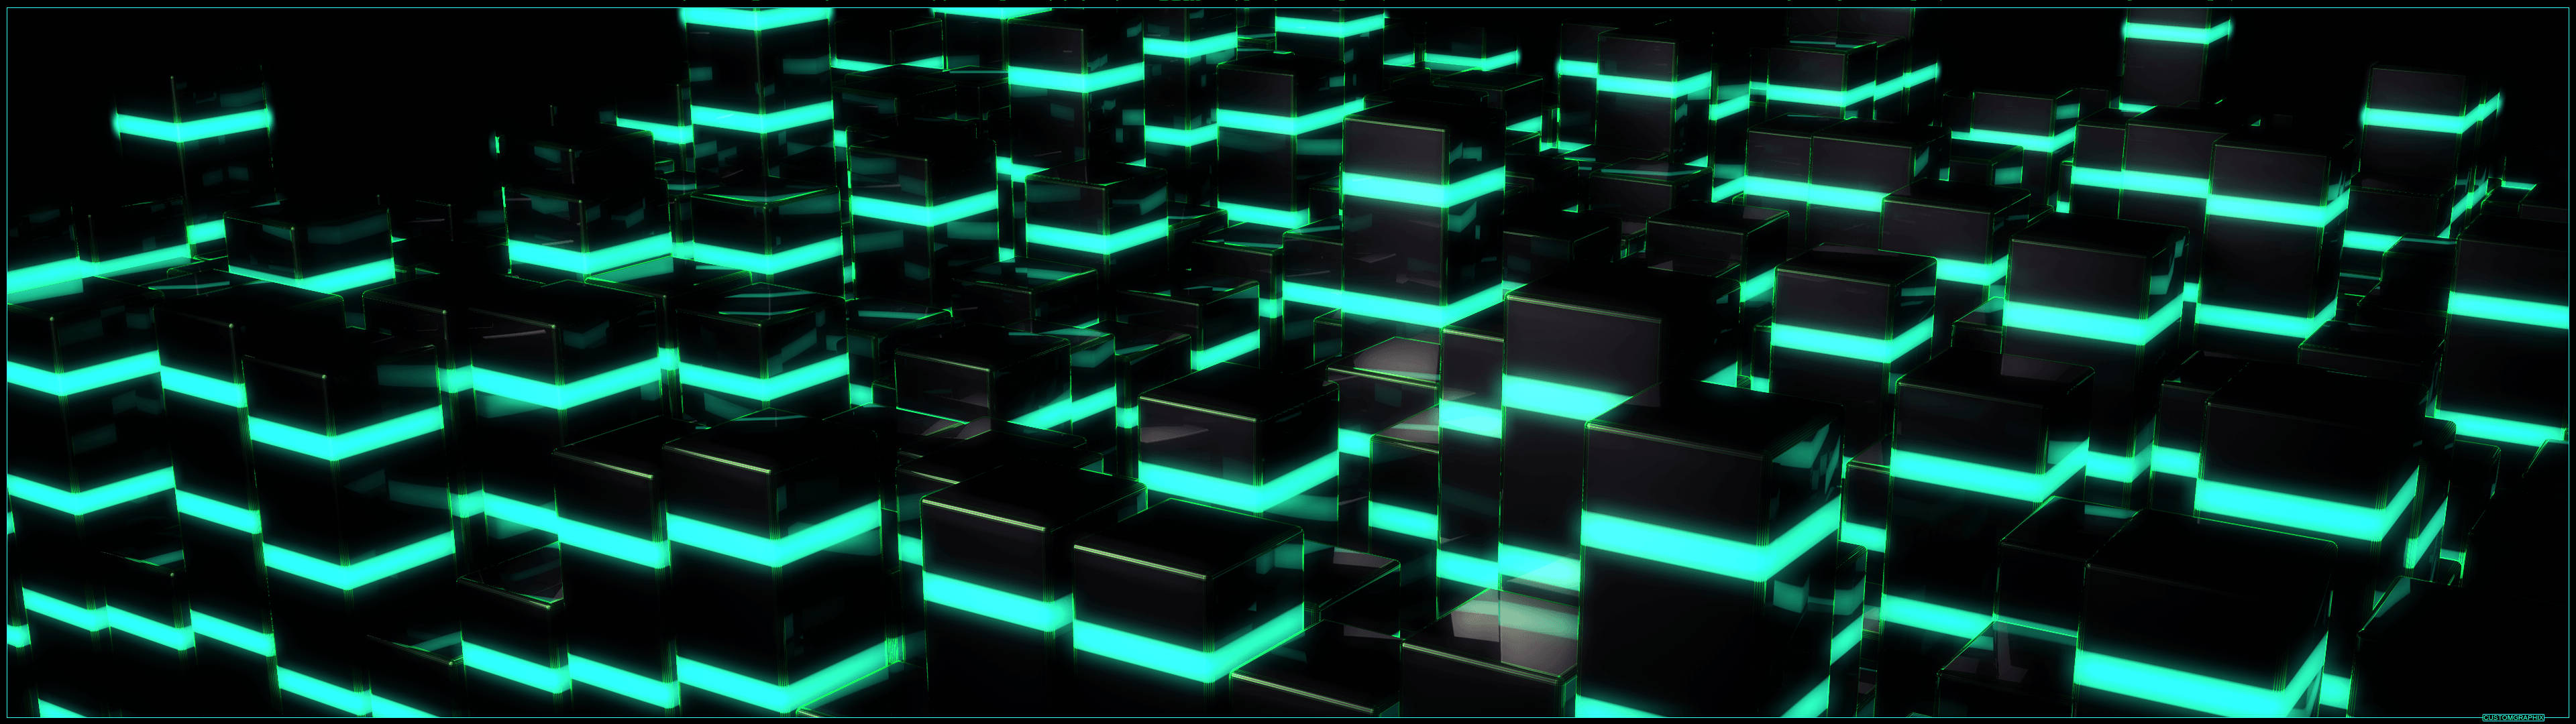 3840x1080 Neon Abstract Art Picture